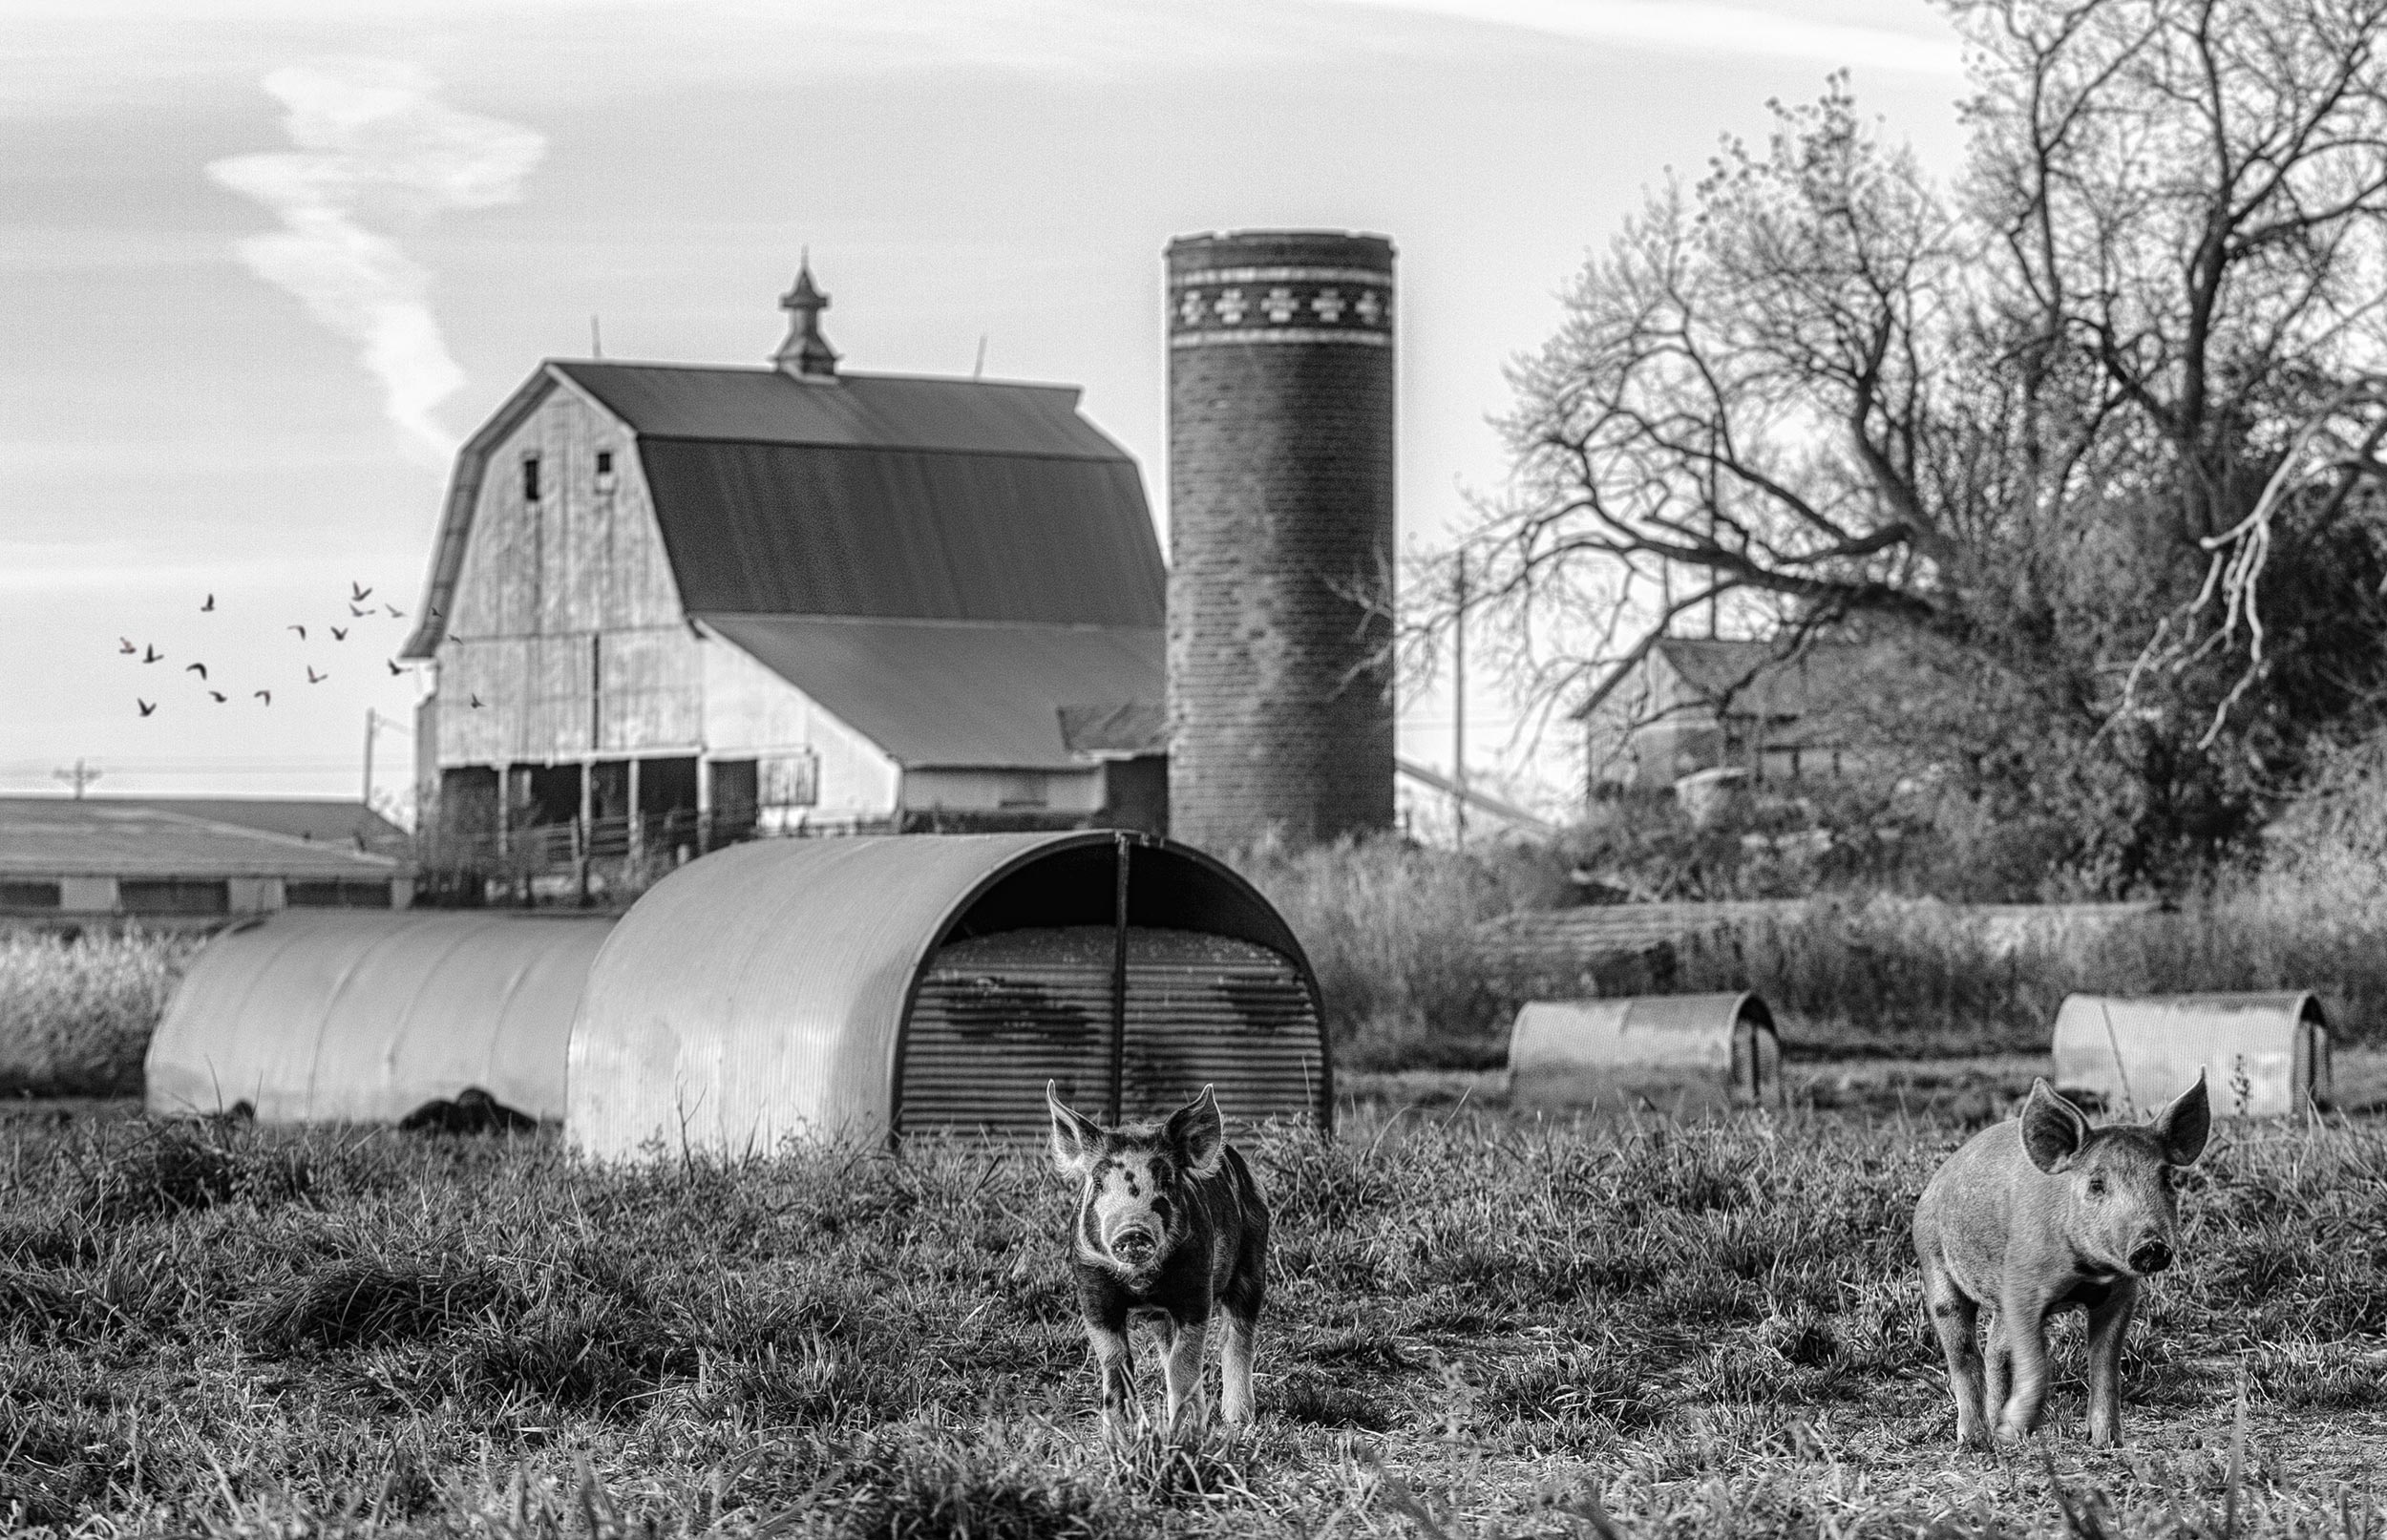 Free range organic pigs and piglets enjoying their morning on the farm. Livestock and agriculture photography